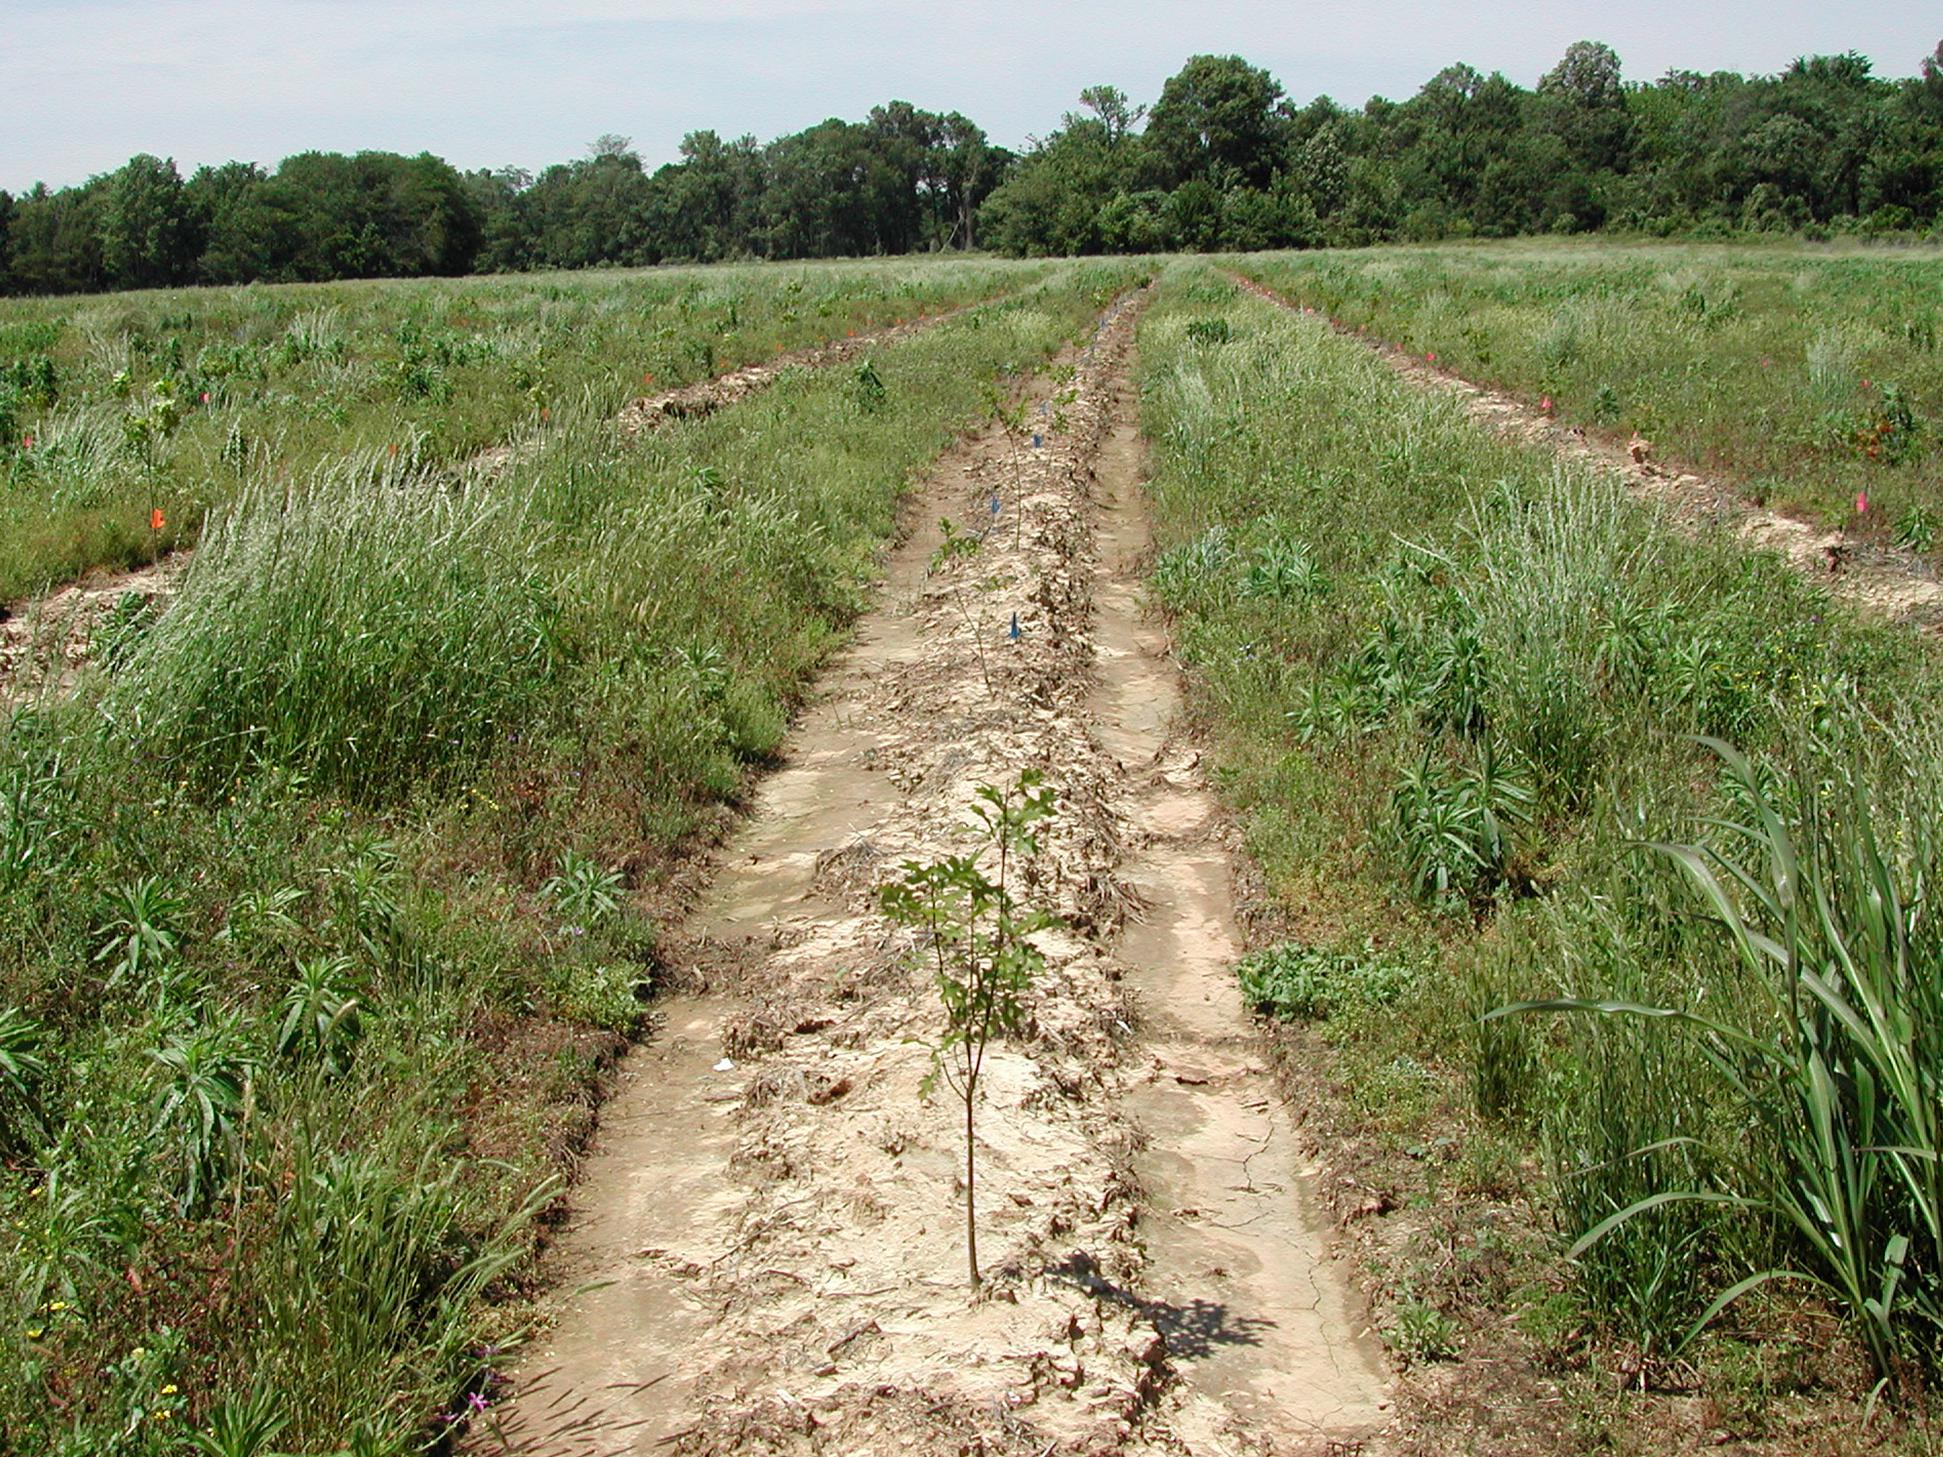 A large field with tree seedlings growing in the middle of a long row void of other plants. Adjacent rows are full of grasses and weeds.